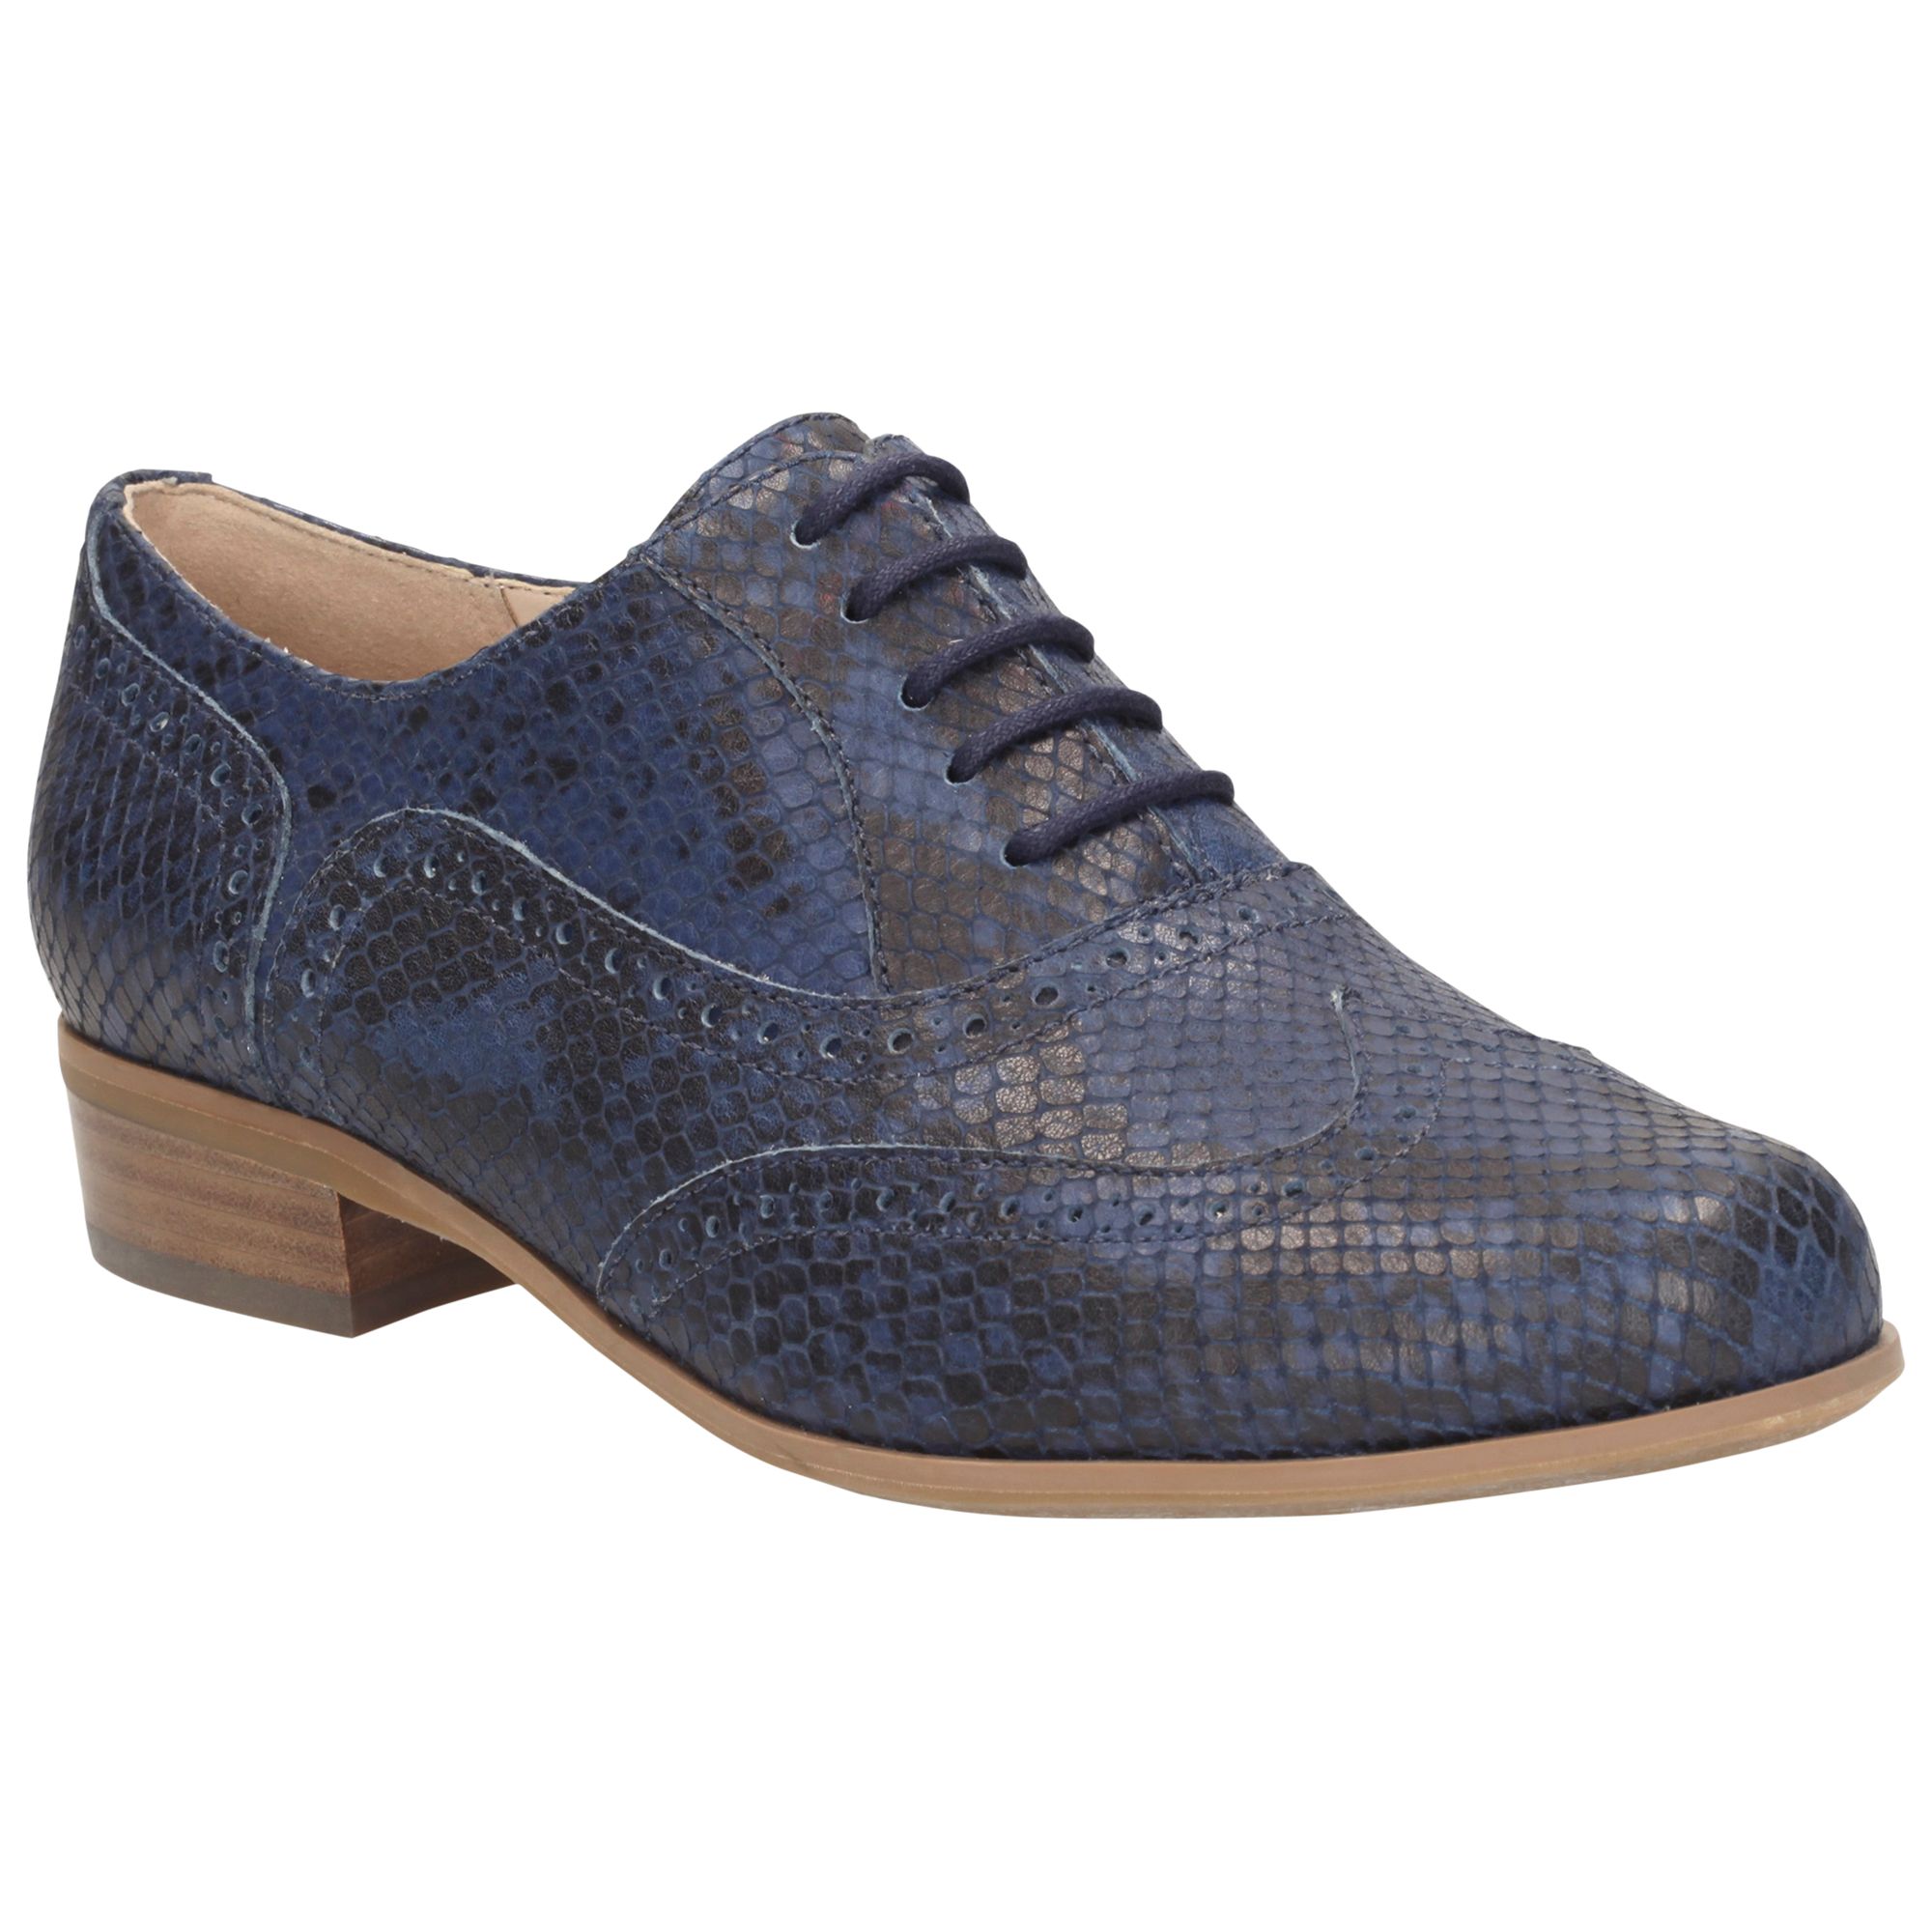 clarks navy brogues womens